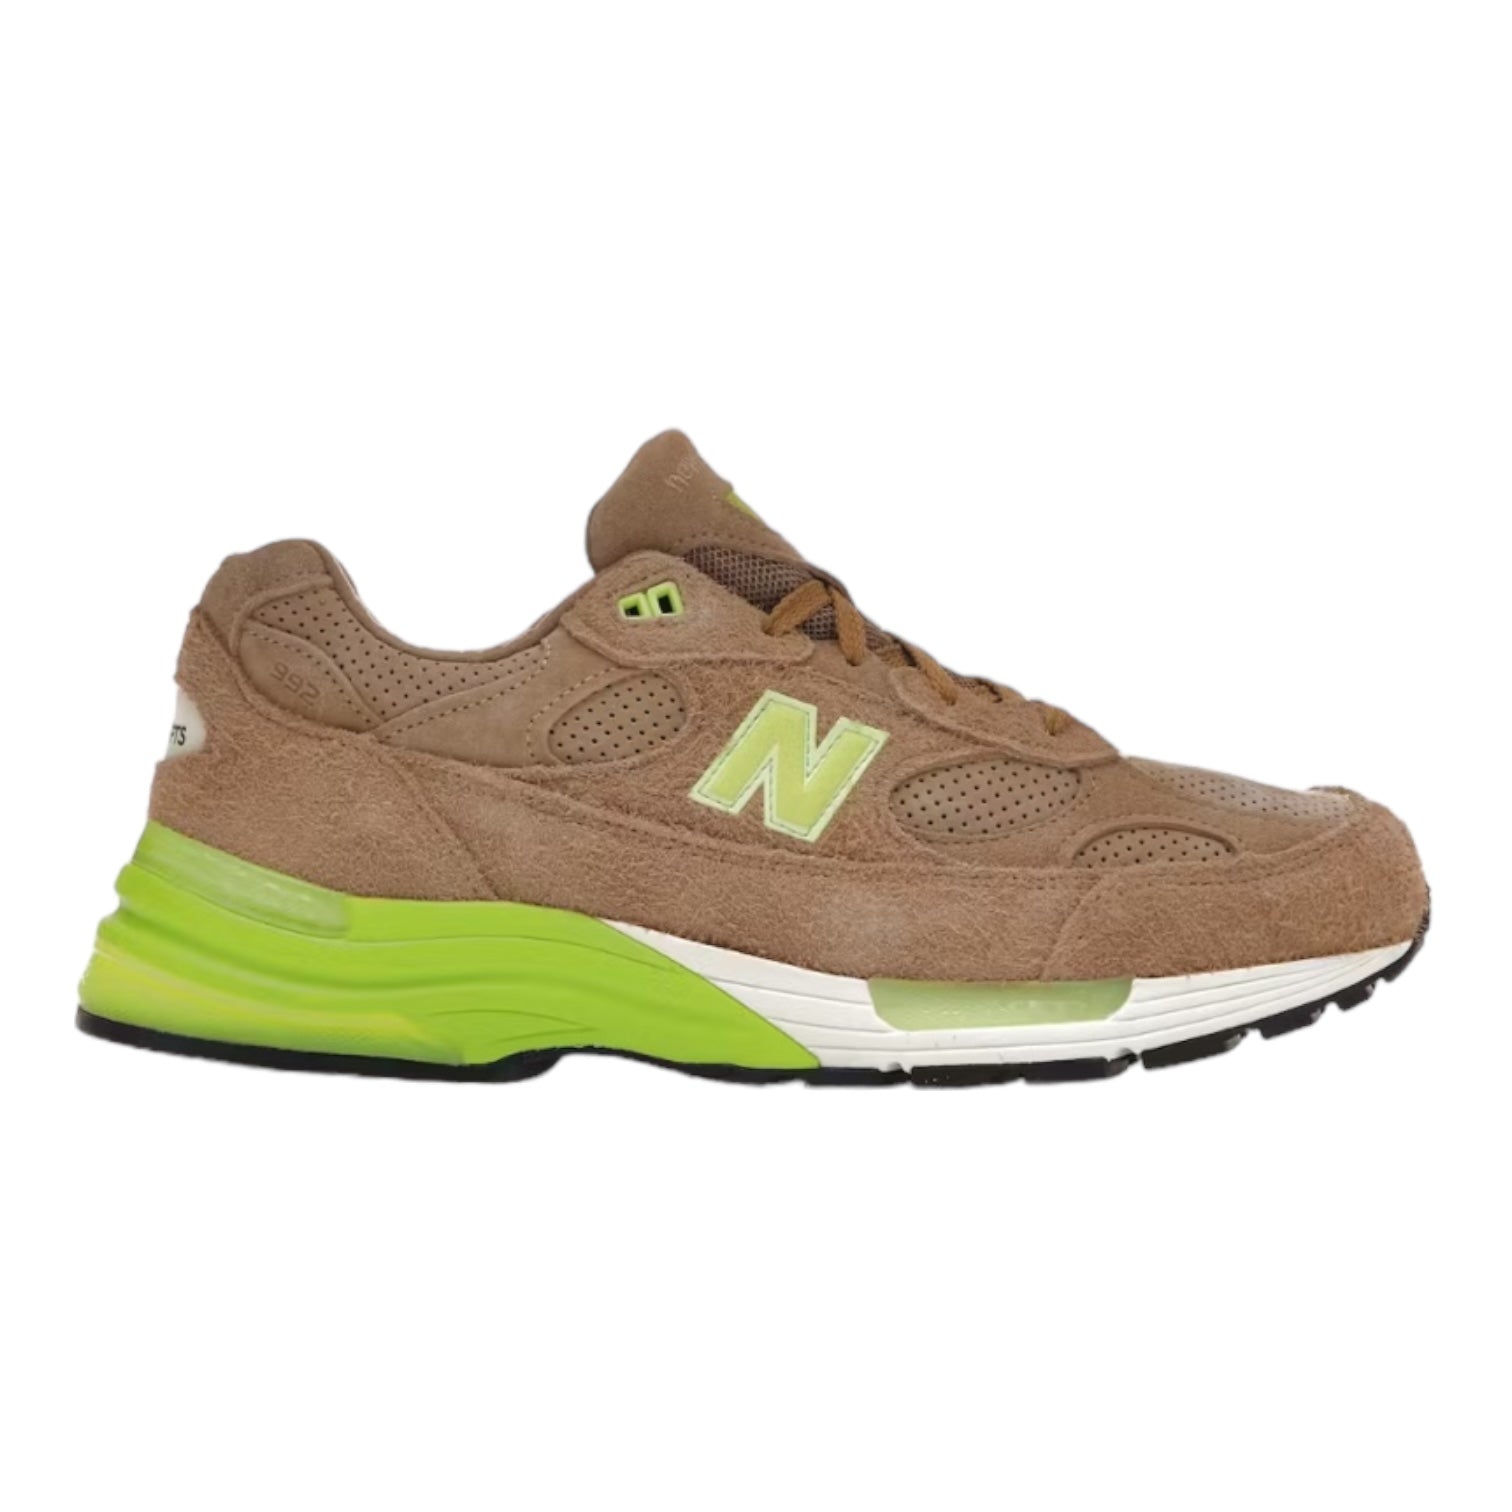 New Balance x Concepts 992 Low Hanging Fruit